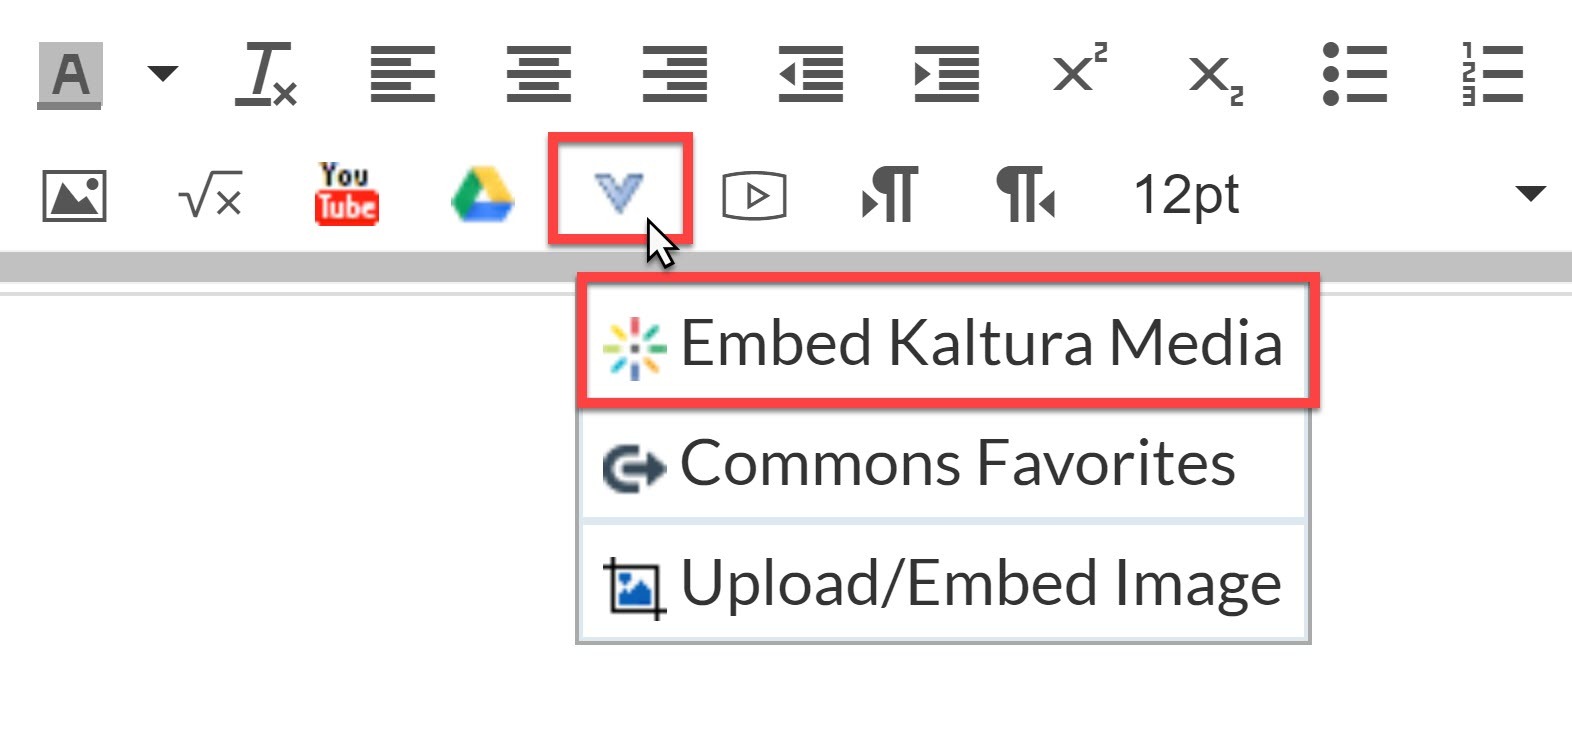 image that shows clicking the blue V icon in the Canvas editor will reveal the "Embed Kaltura Media" option in a drop down menu